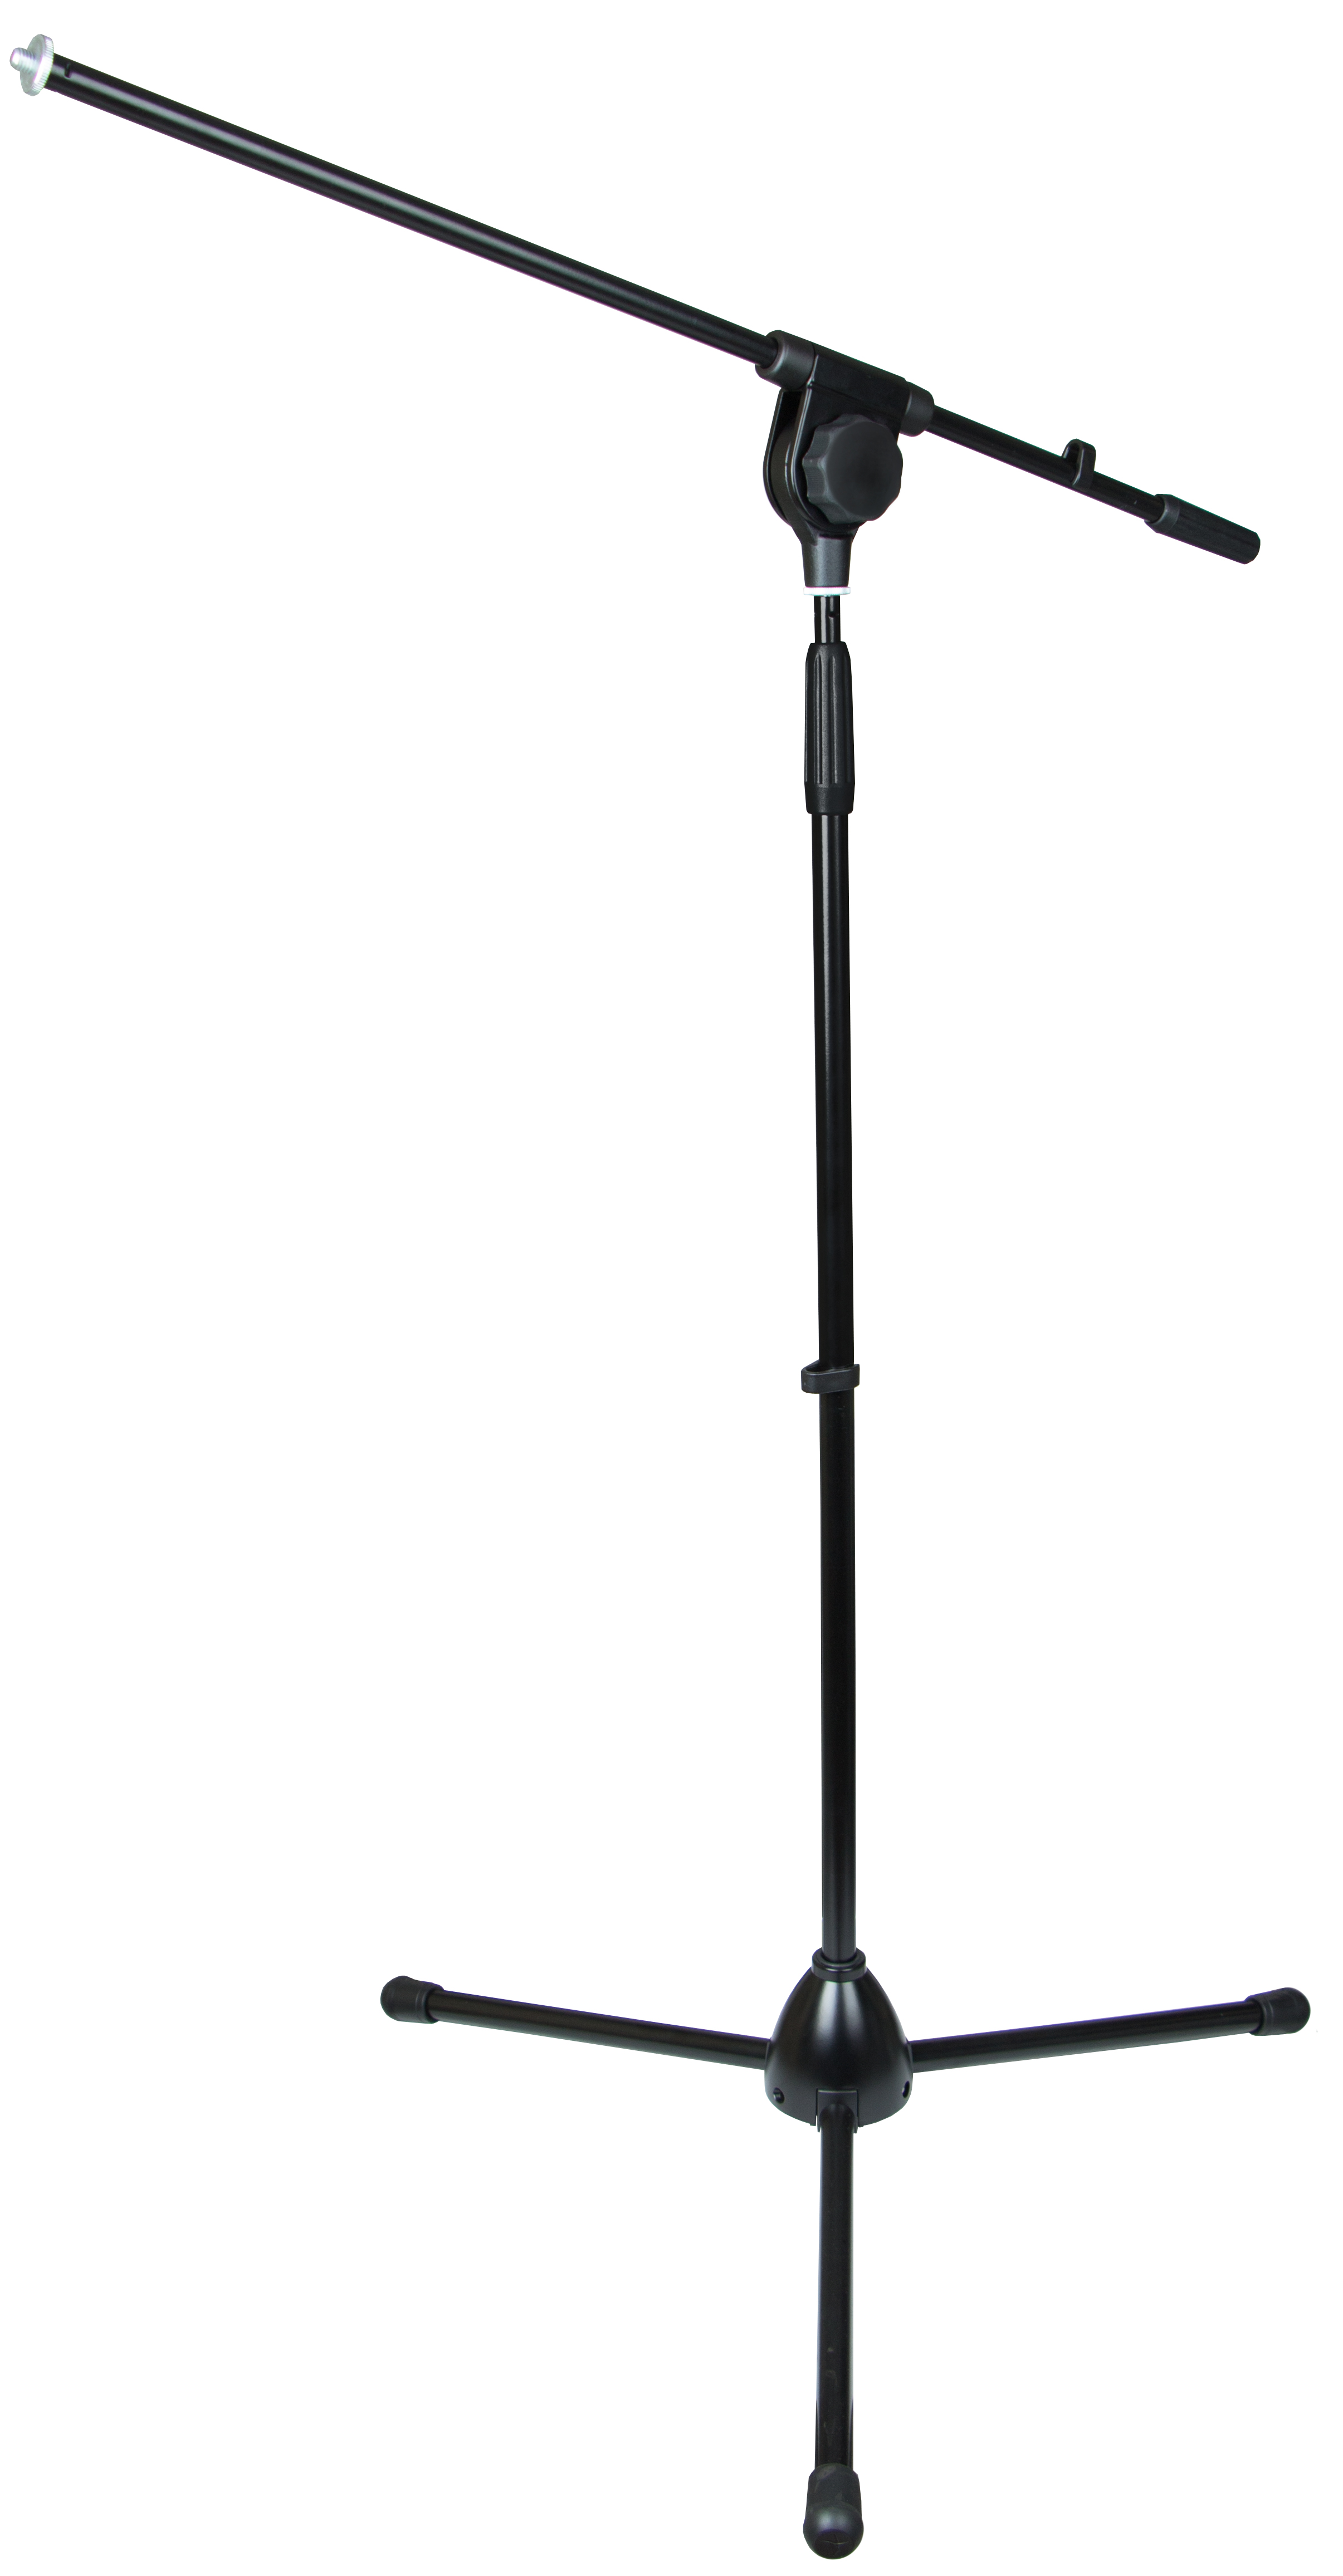 Professional microphone stand with adjustable swivel arm